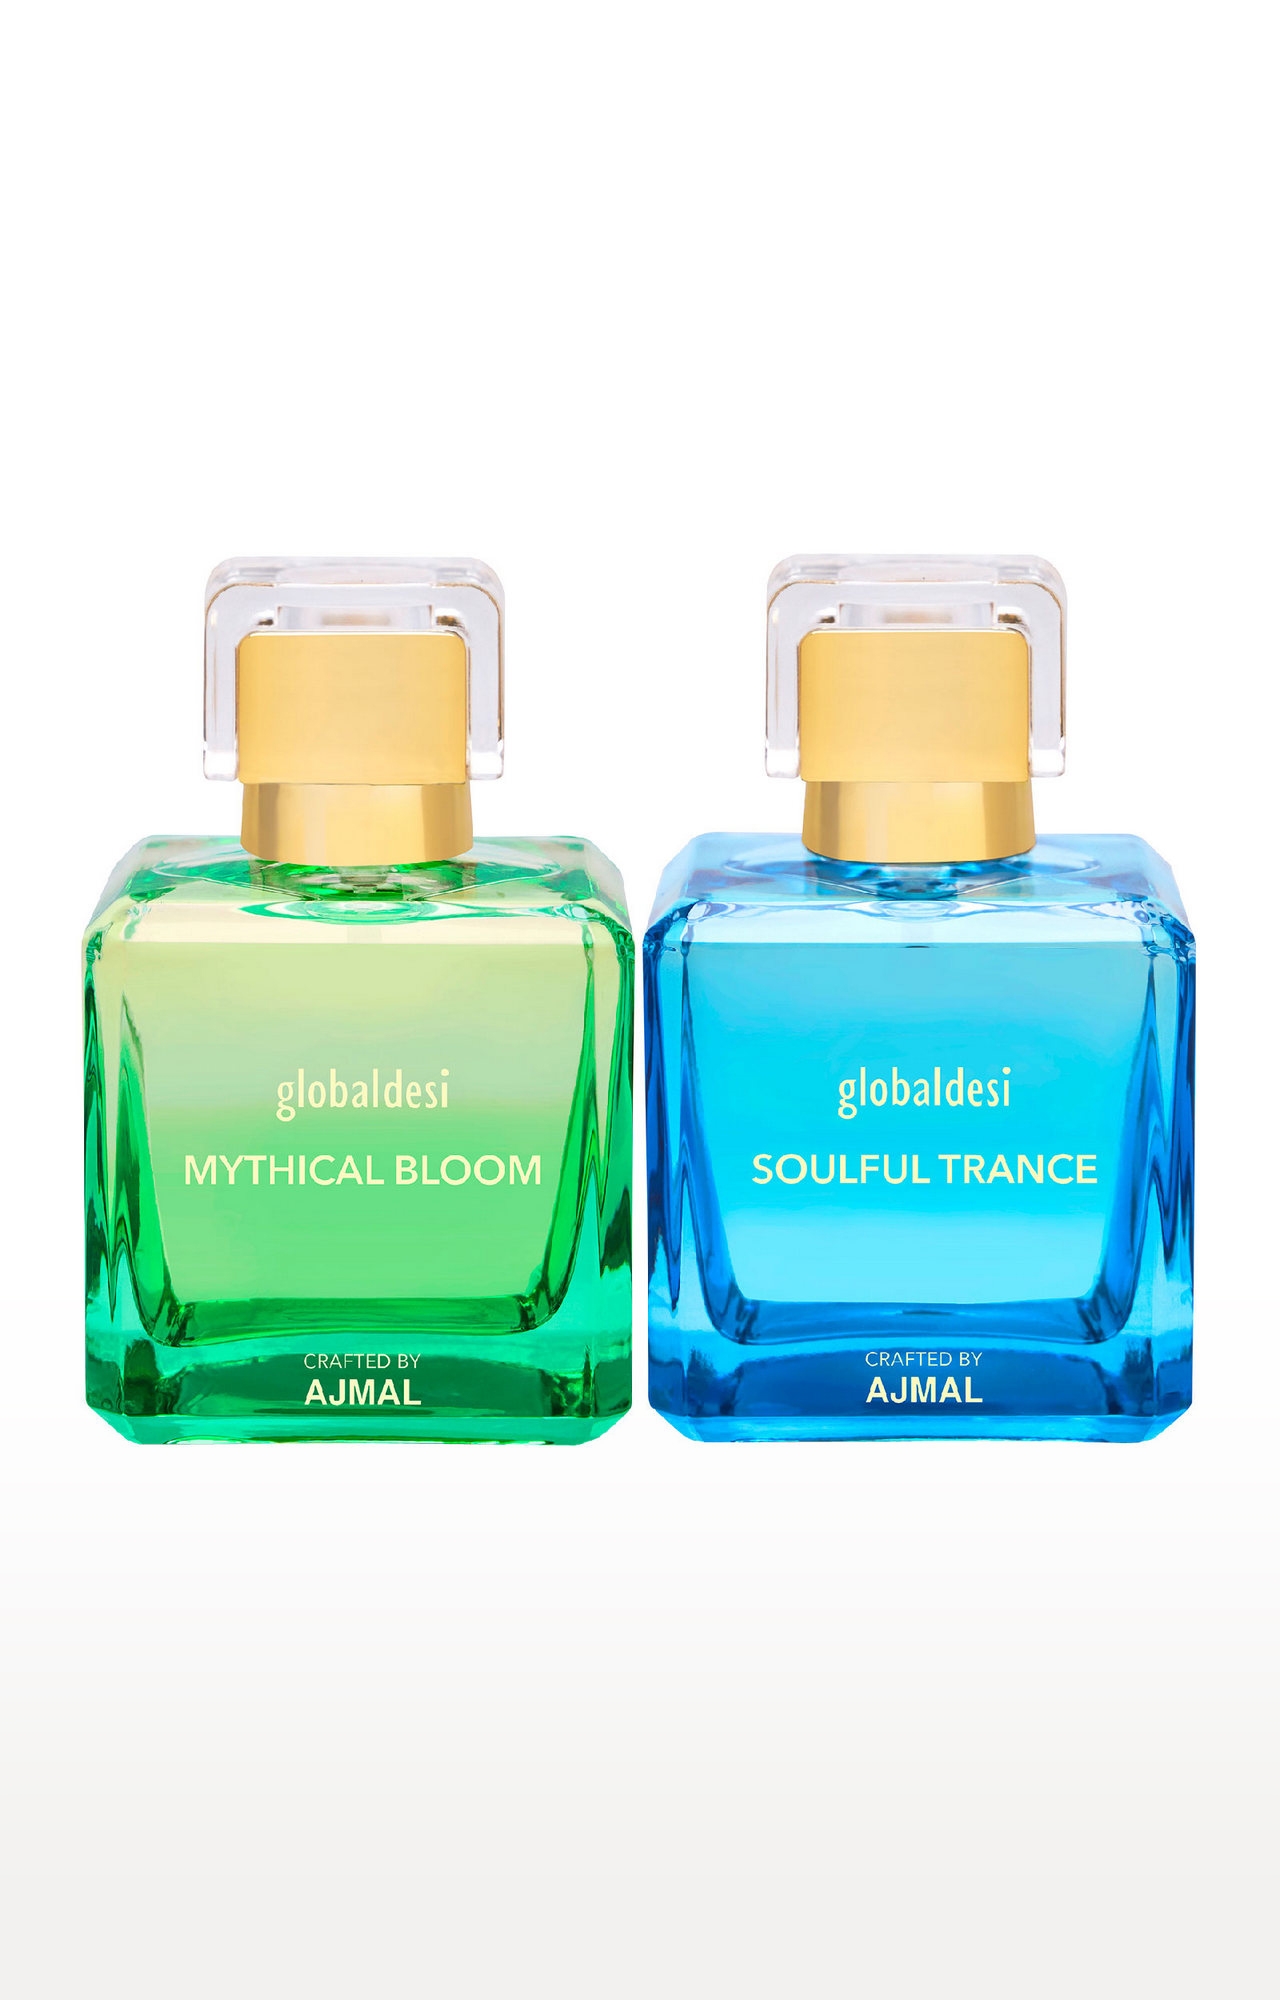 Global Desi Crafted By Ajmal | Global Mythical Bloom & Soulful Trance Pack of 2 Eau De Parfum 100ML for Women Crafted by Ajmal + 2 Parfum Testers